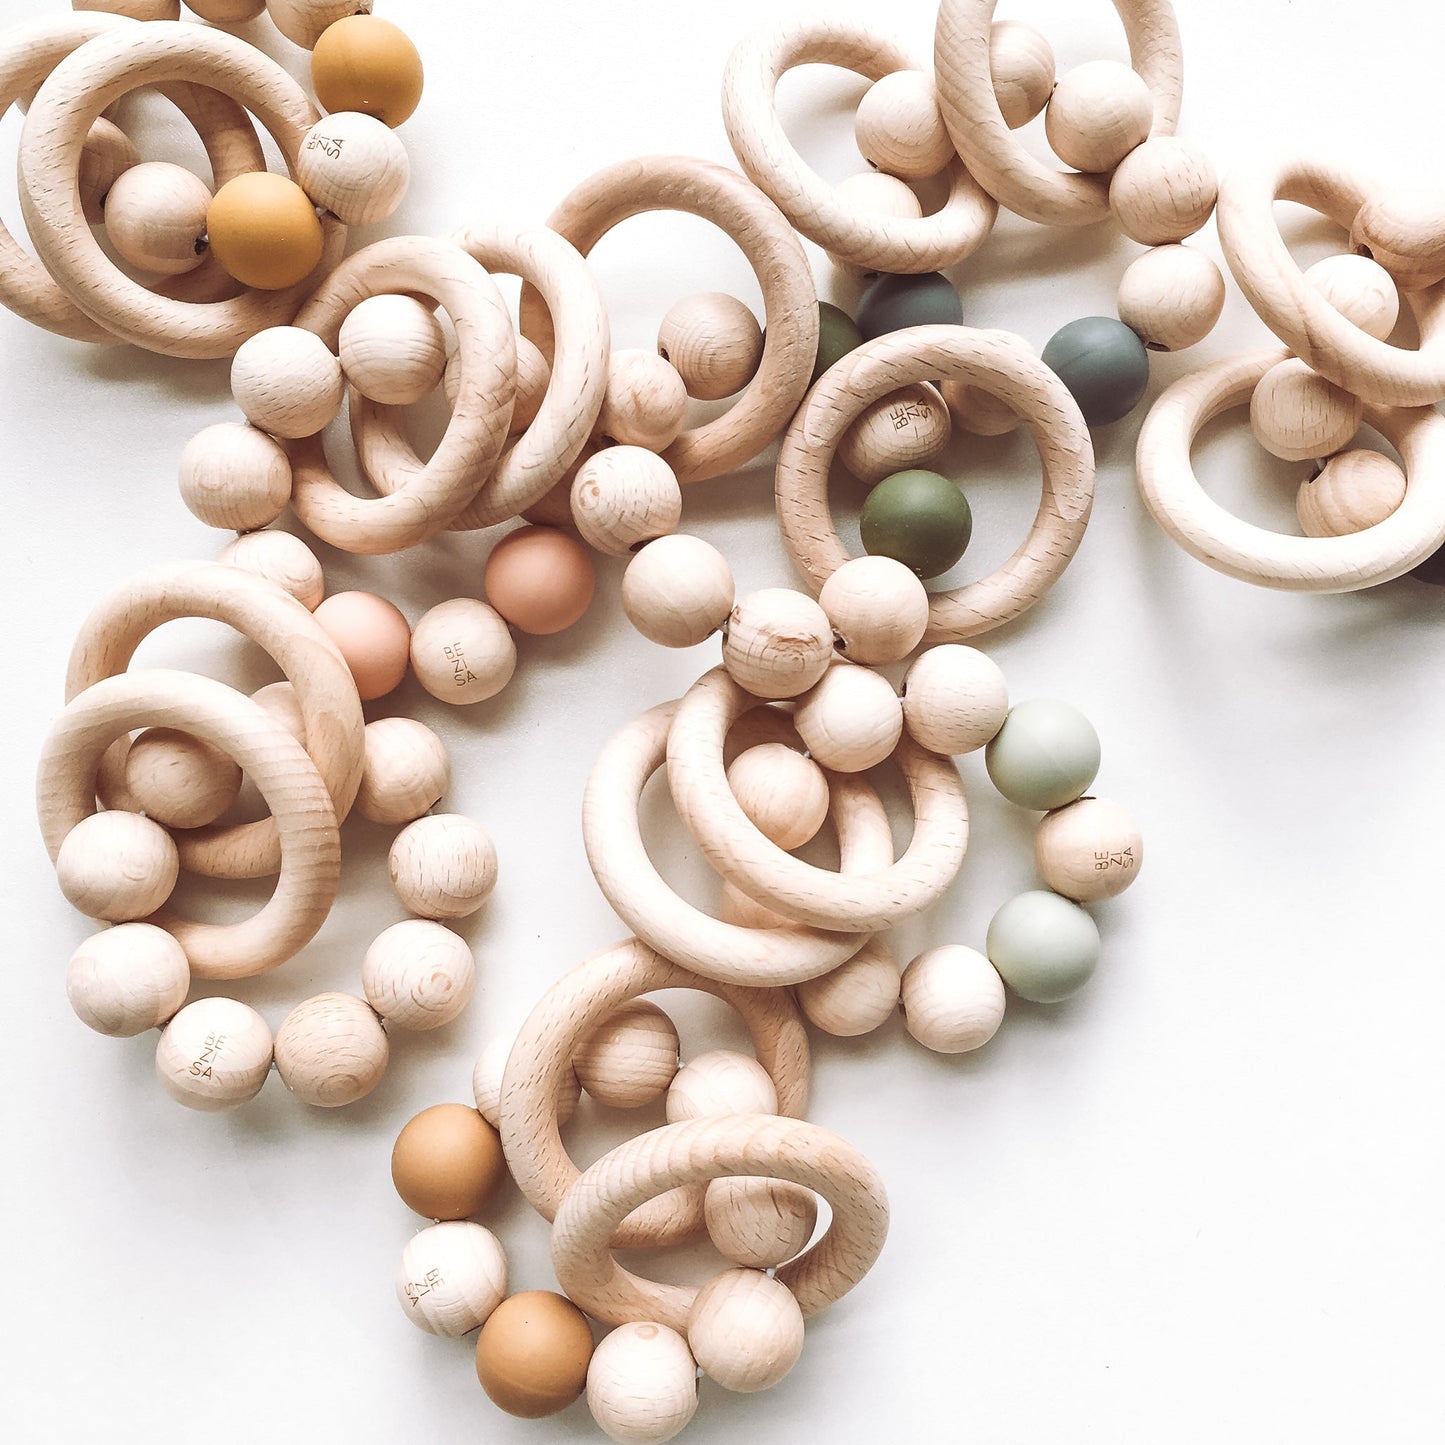 Bezisa wooden baby rattle with a mix of round wooden beads and coloured 100% silicone beads, plus two wooden rings. A selection of rattles photographed on a white background.